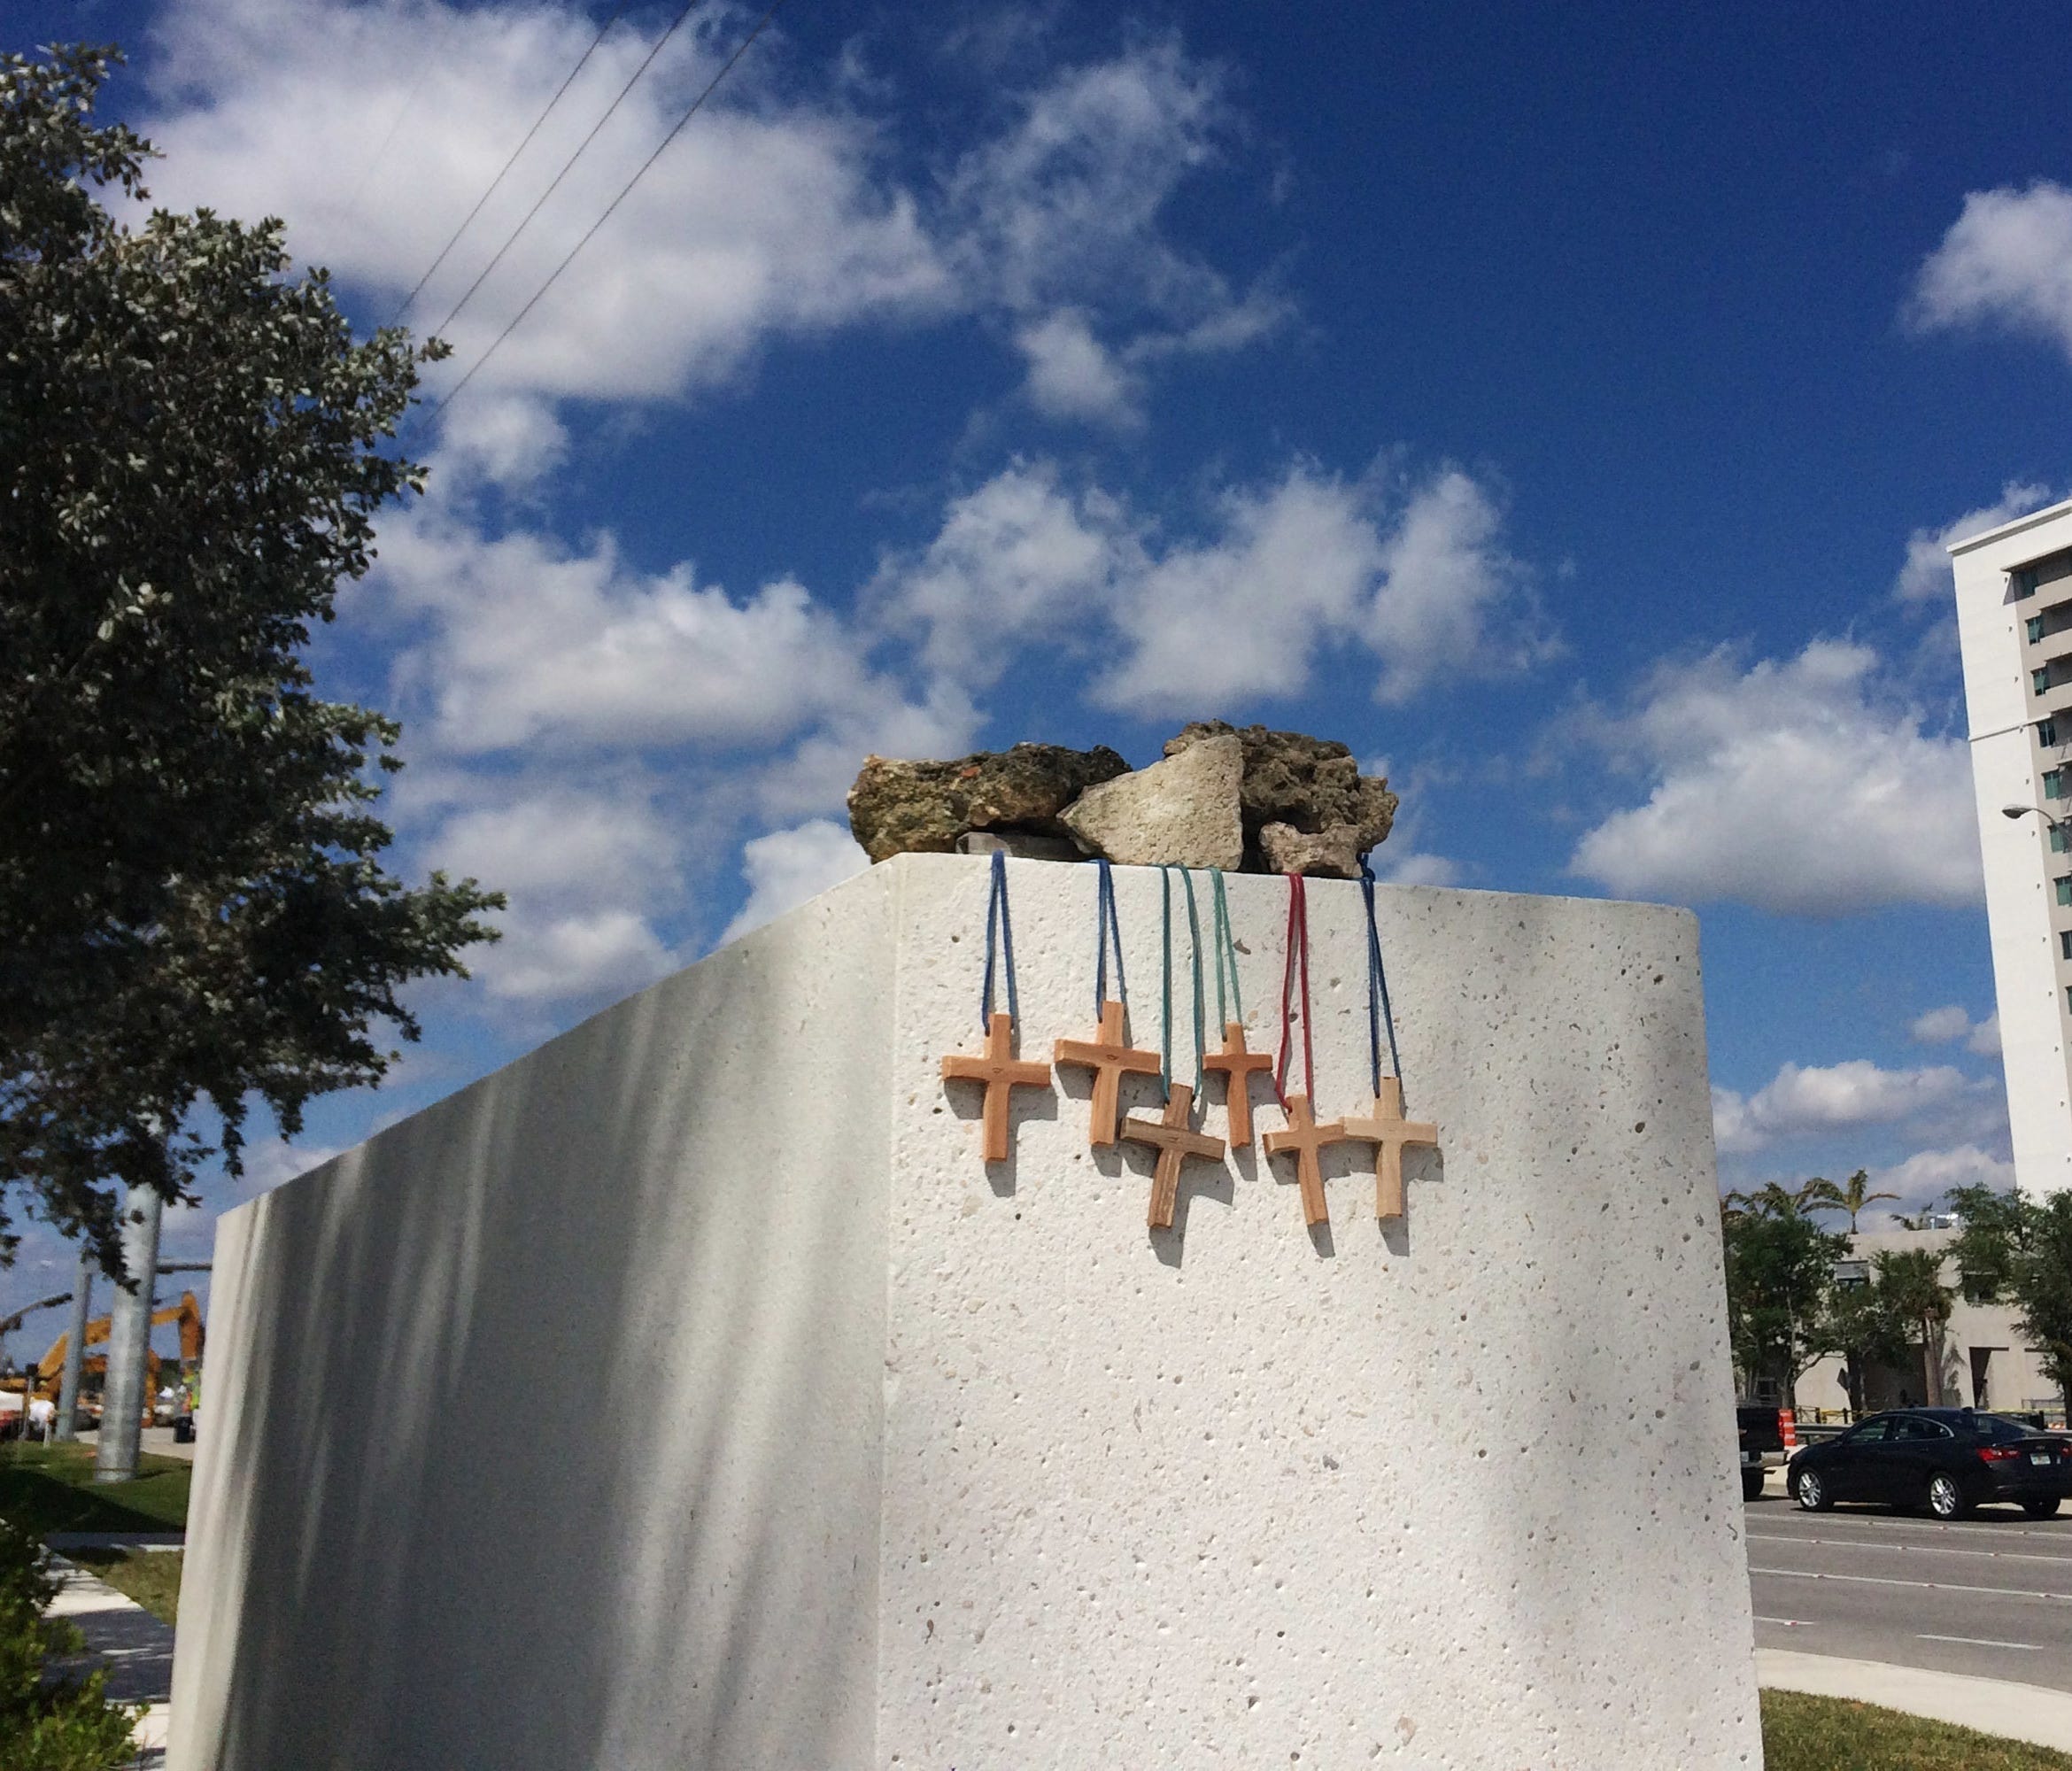 Six crosses are placed at a makeshift memorial on the Florida International University campus in Miami on March 17, 2018, near the scene of a pedestrian bridge collapse that killed at least six people on March 15.